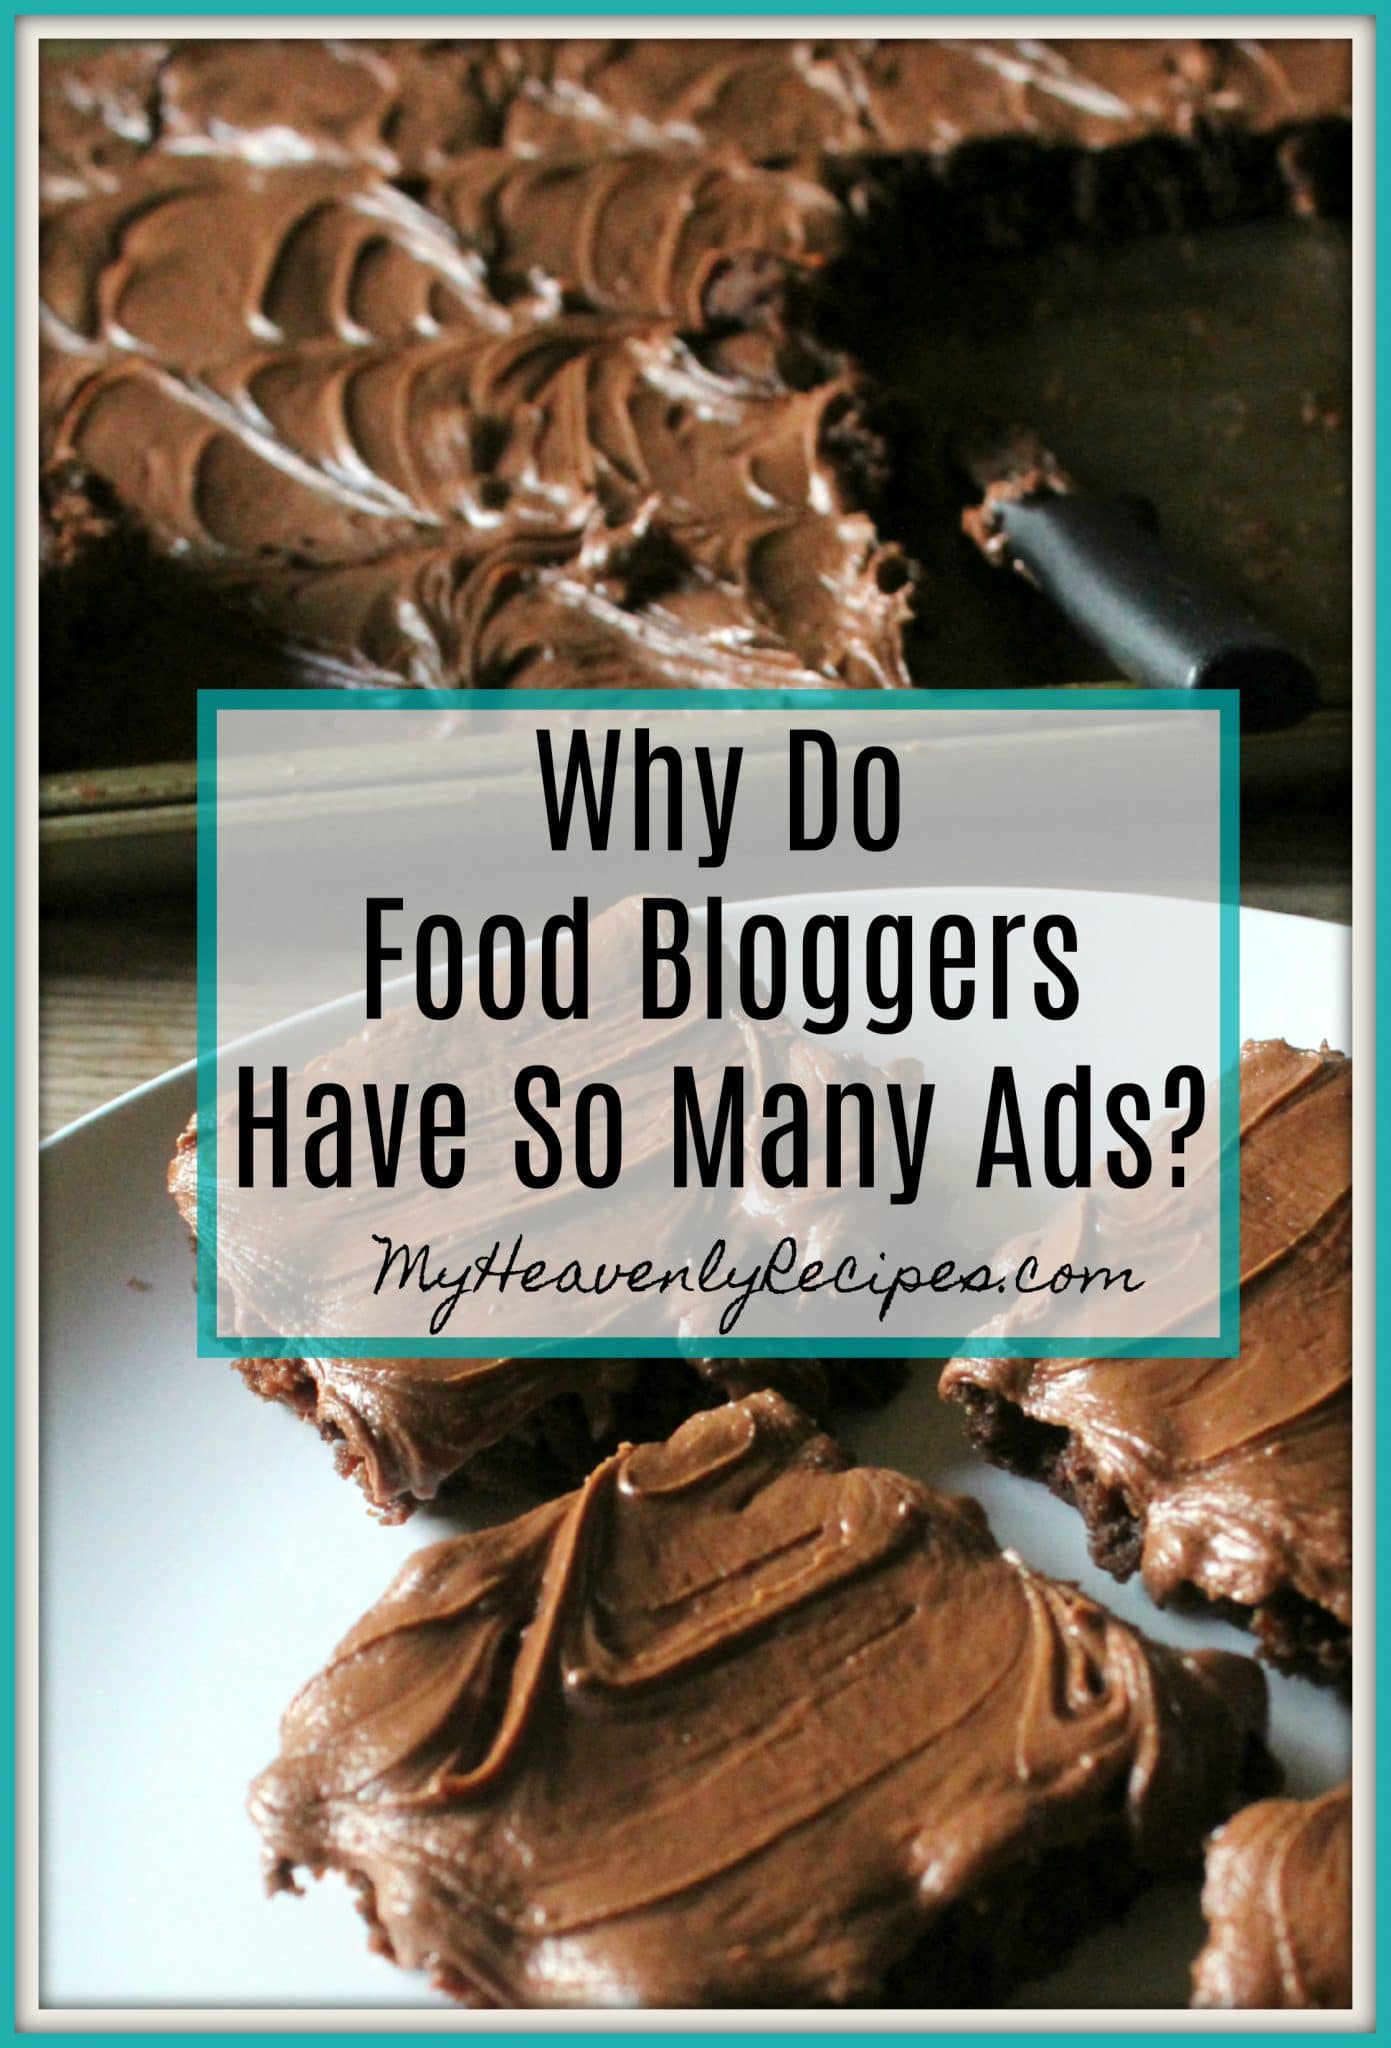 Why Do Food Bloggers Have So Many Ads?